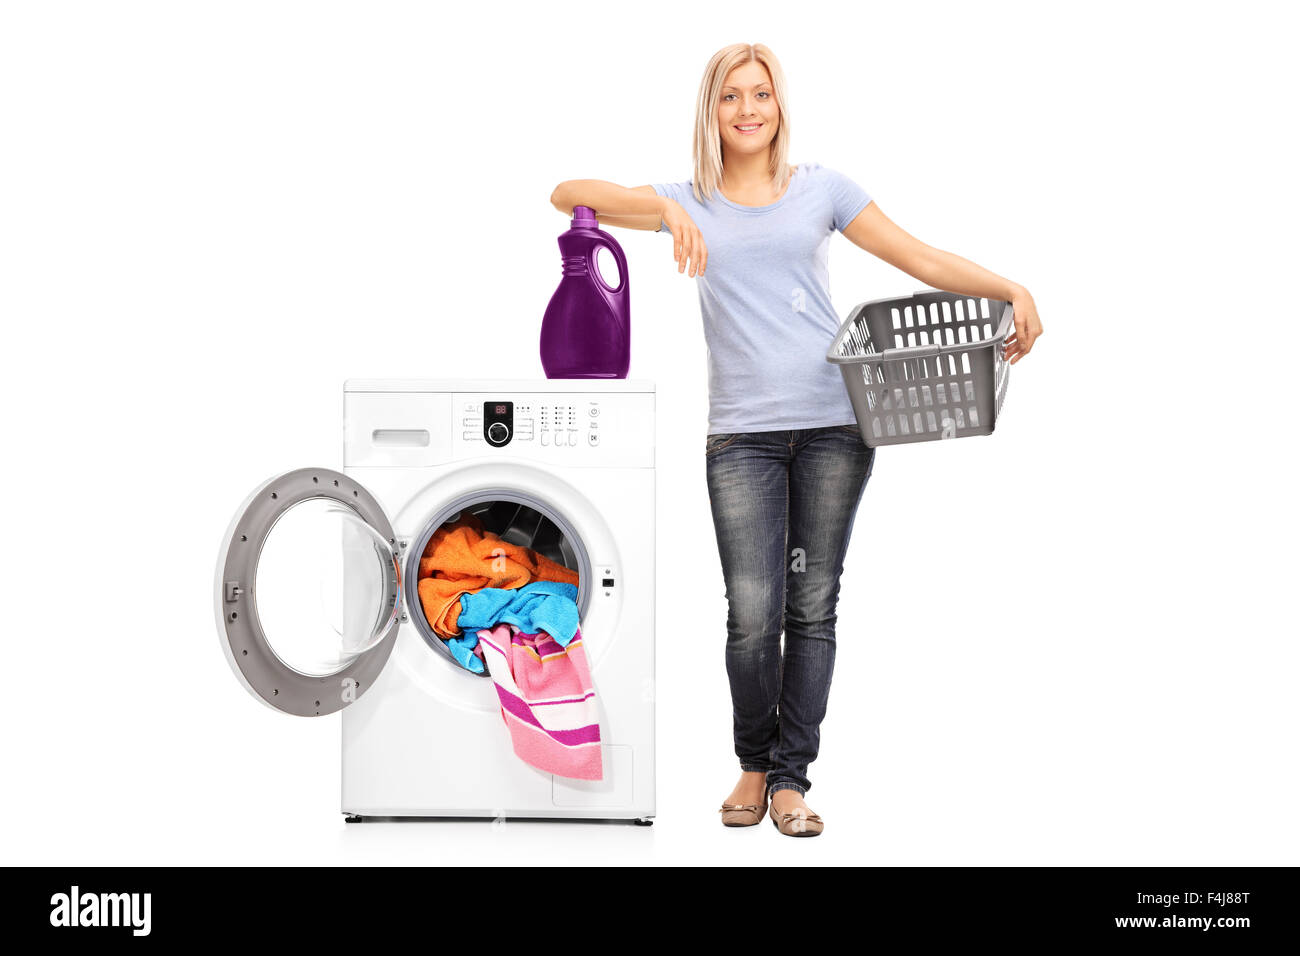 Full length portrait of a young woman holding an empty basket and leaning on a laundry detergent on top of a washing machine Stock Photo